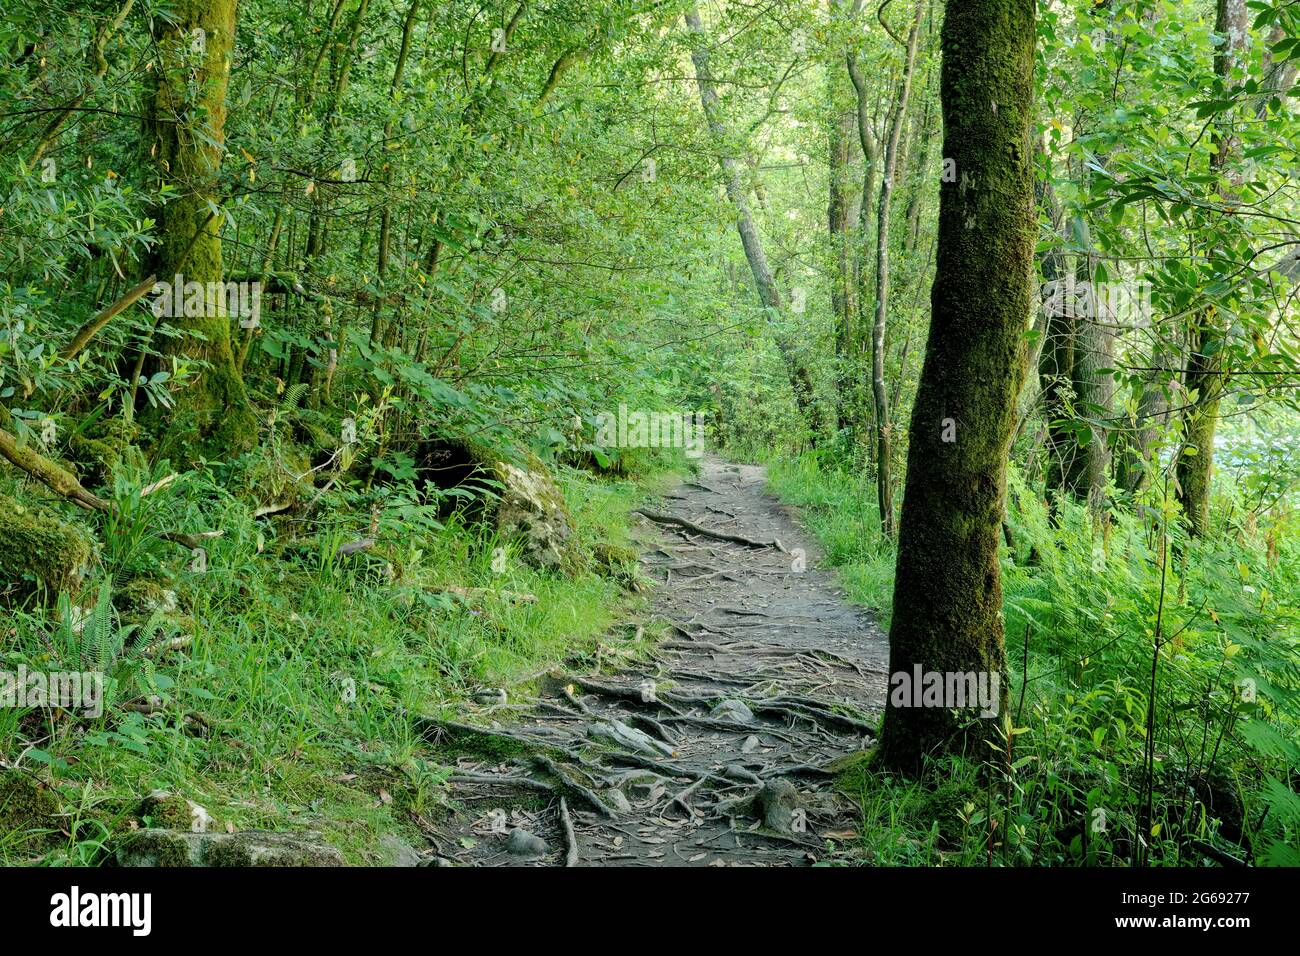 Footpath in green old-growth forest in Fragas do Eume natural park, Galicia, Spain Stock Photo